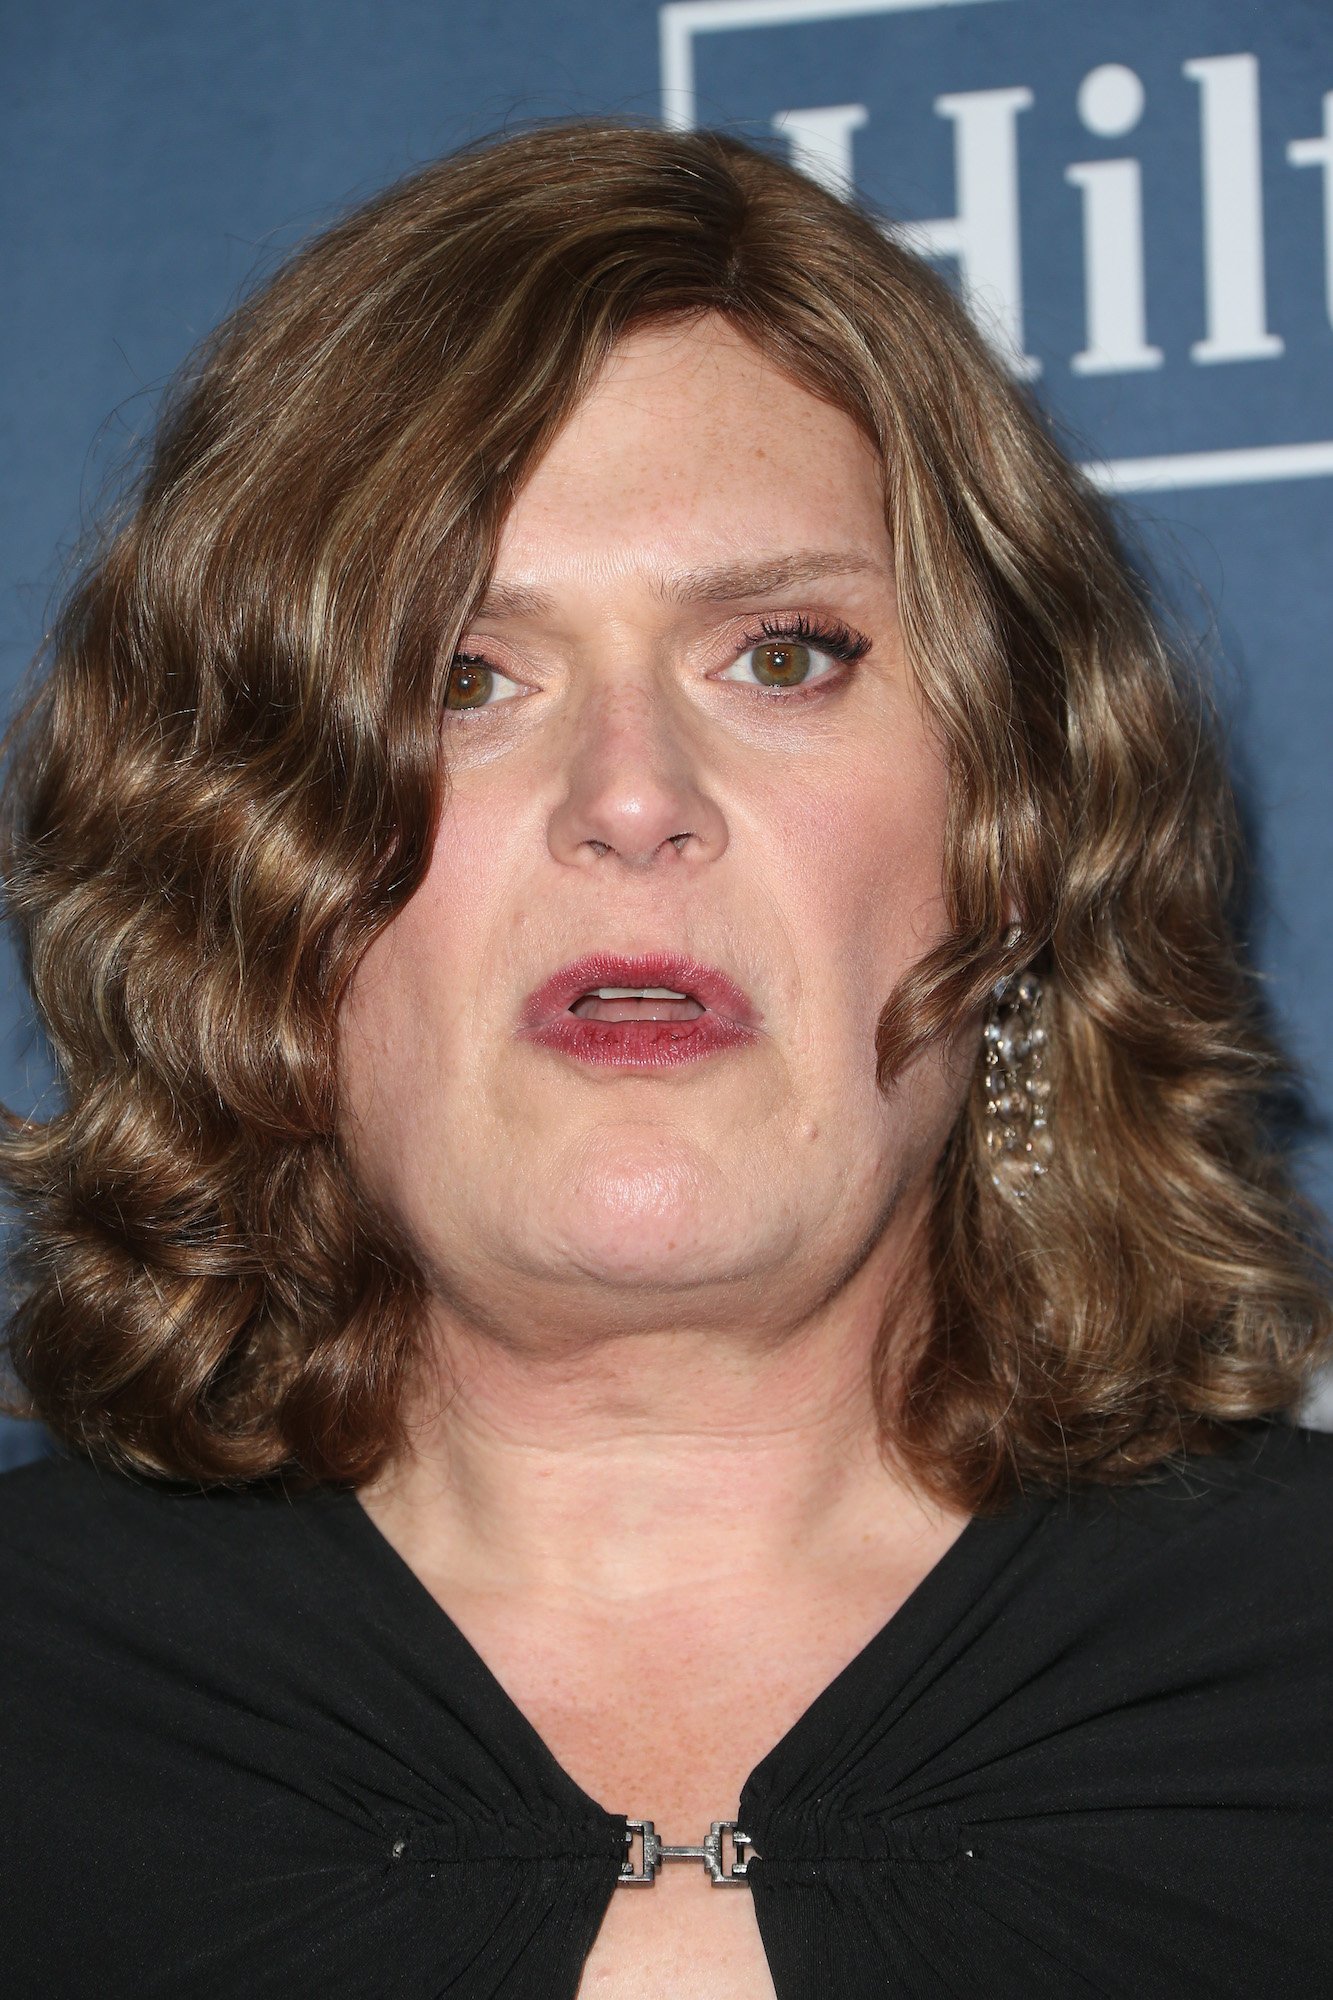 Lilly Wachowski on the GLAAD Awards red carpet